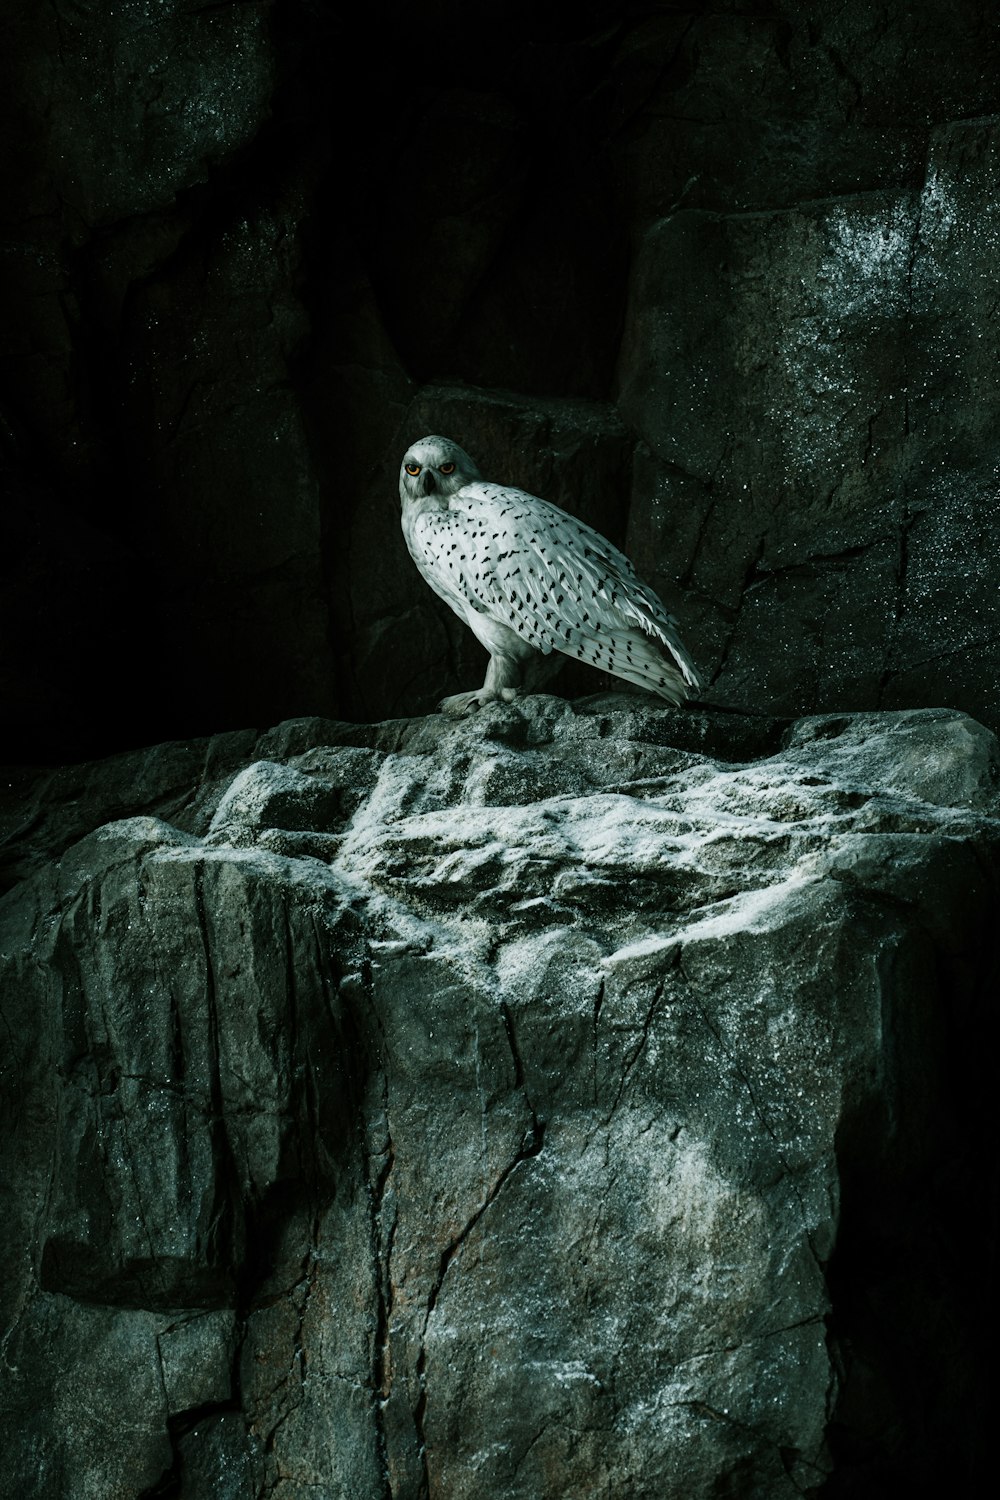 a white owl sitting on top of a rock